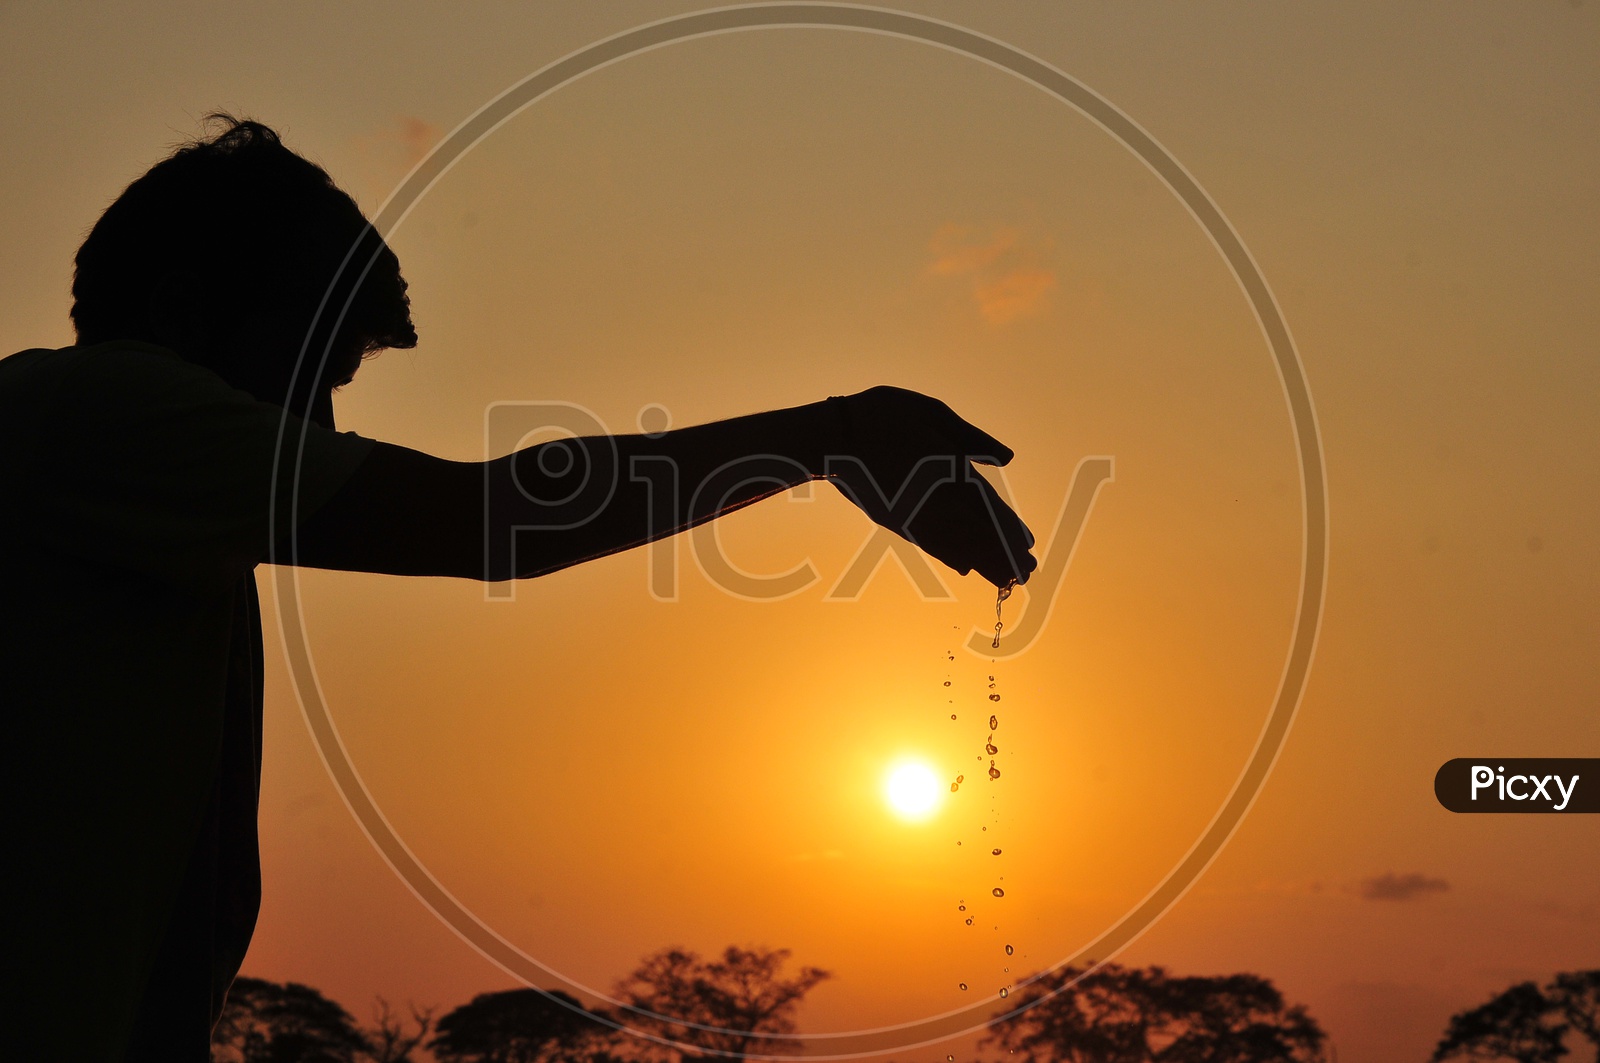 Silhouette of a man leaving water from hand